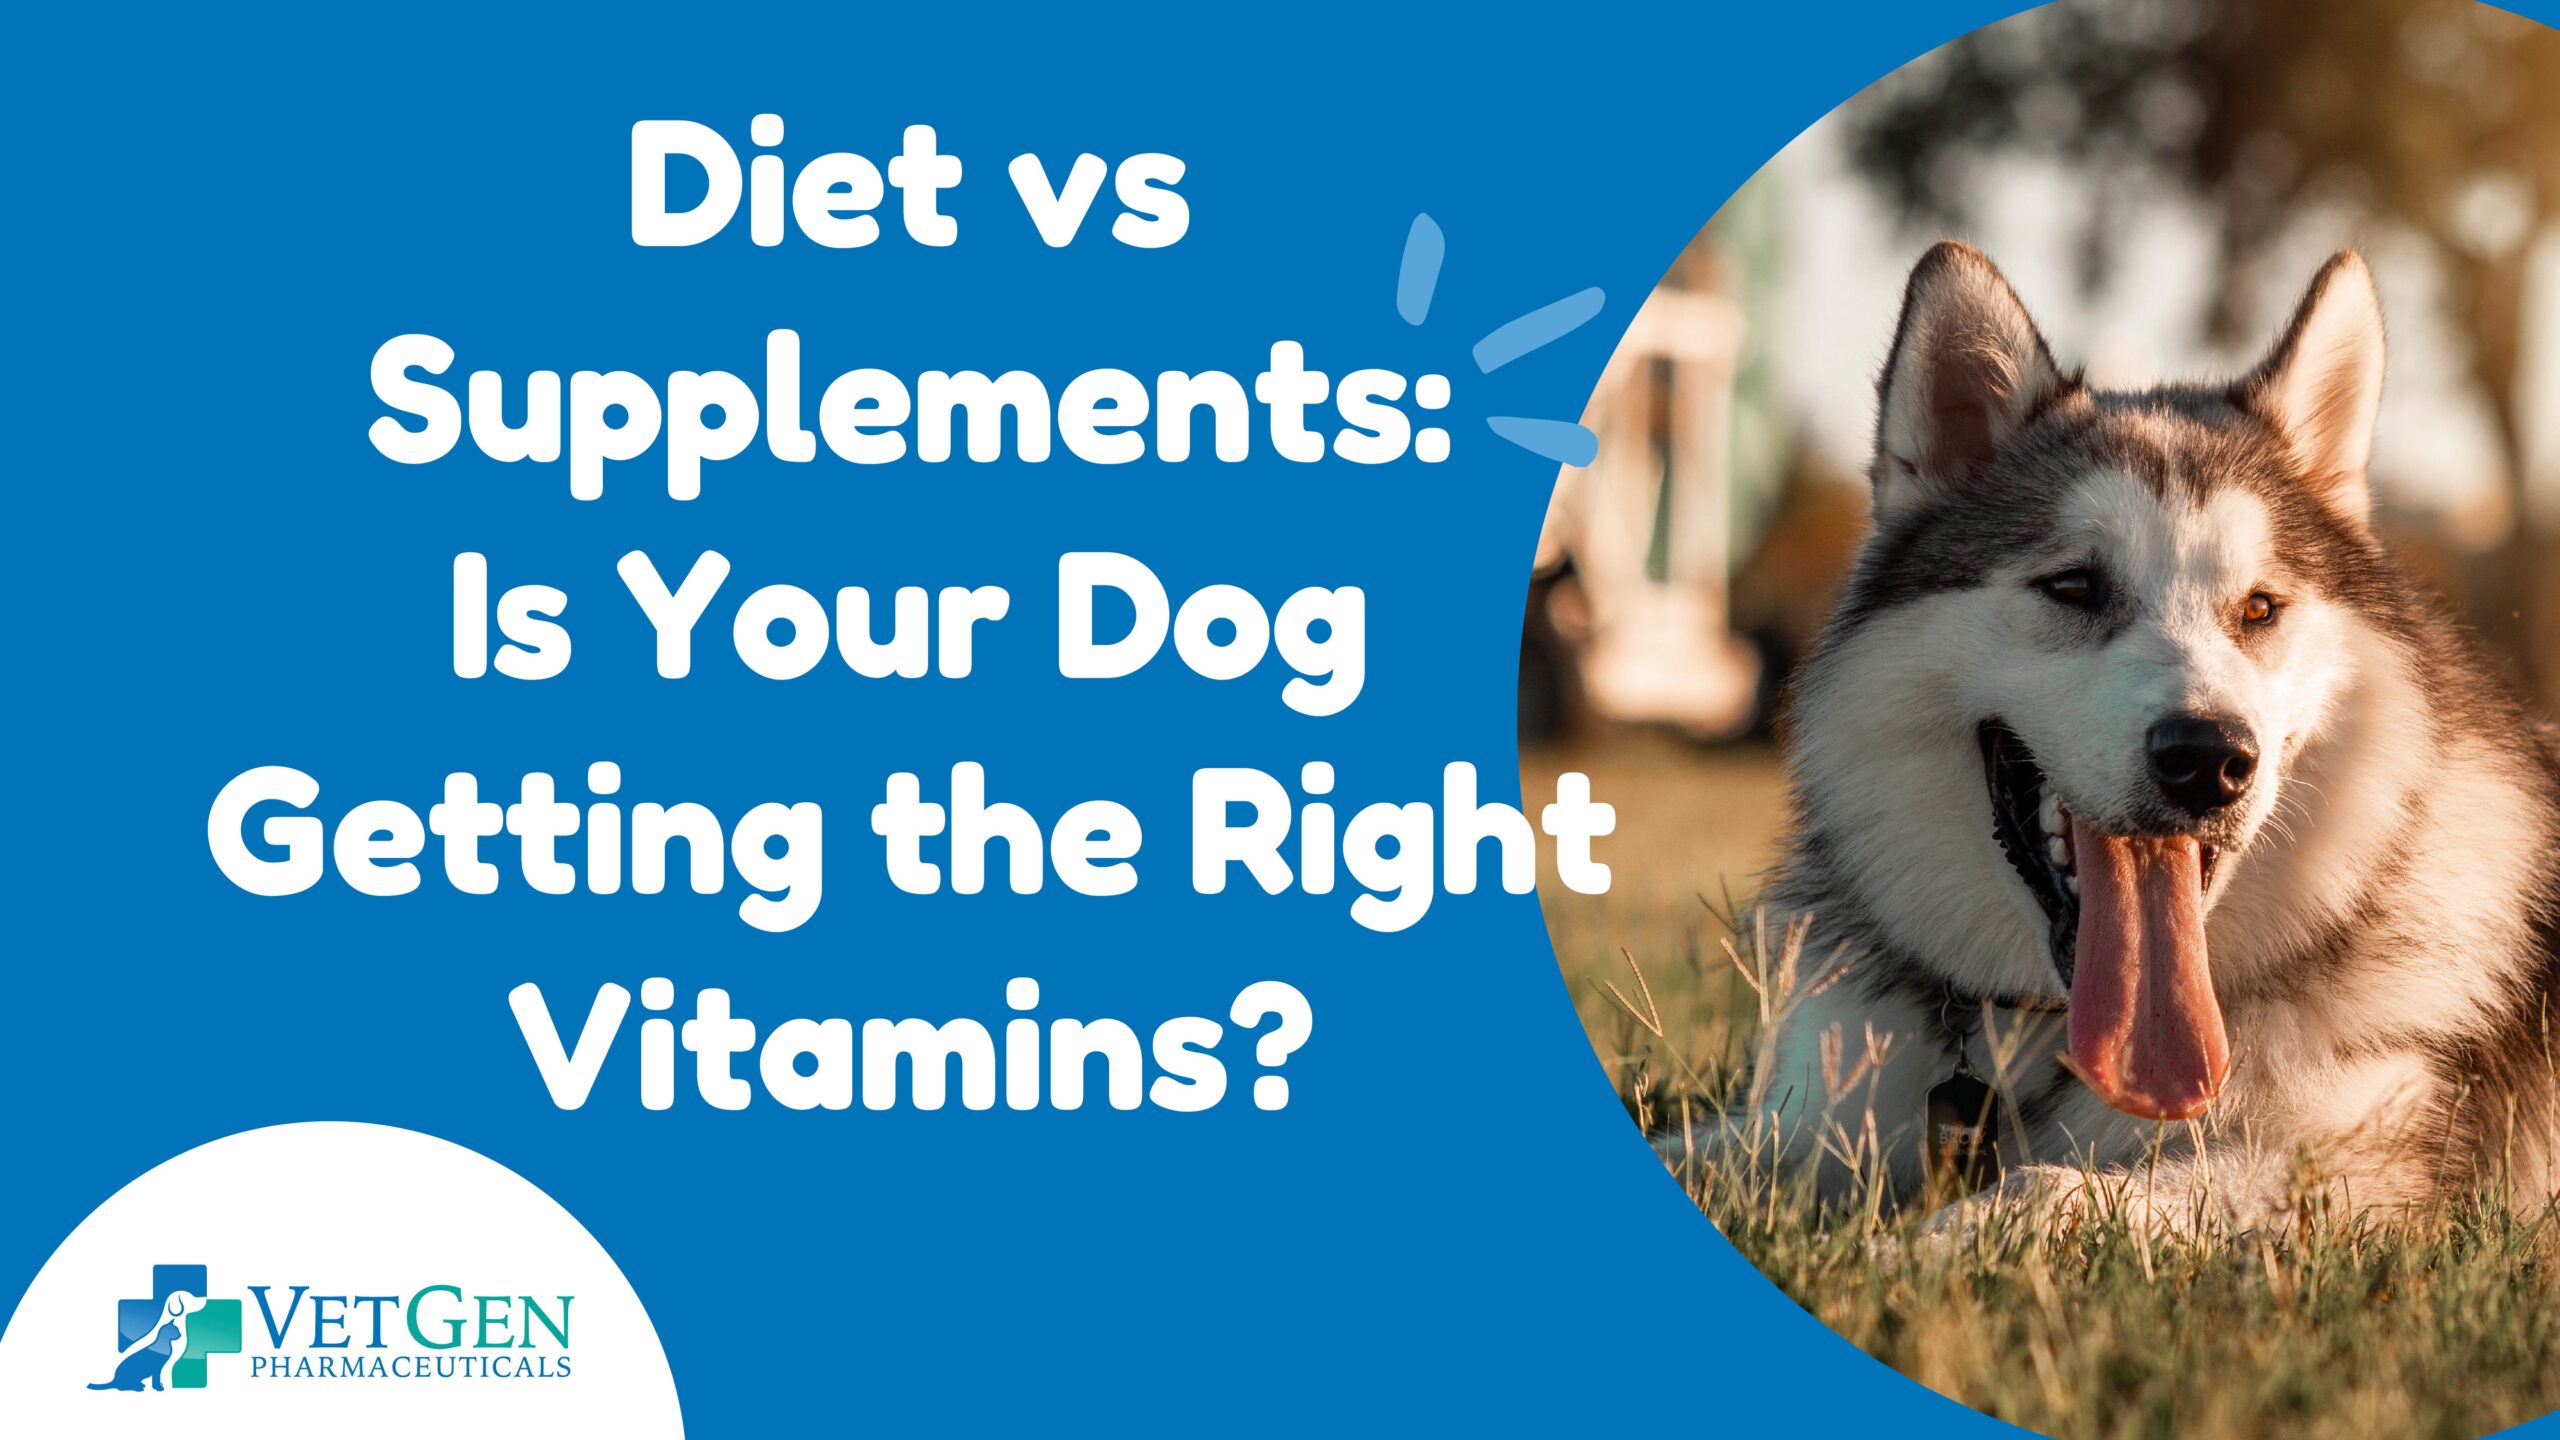 Diet vs Supplements - Is Your Dog Getting the Right Vitamins